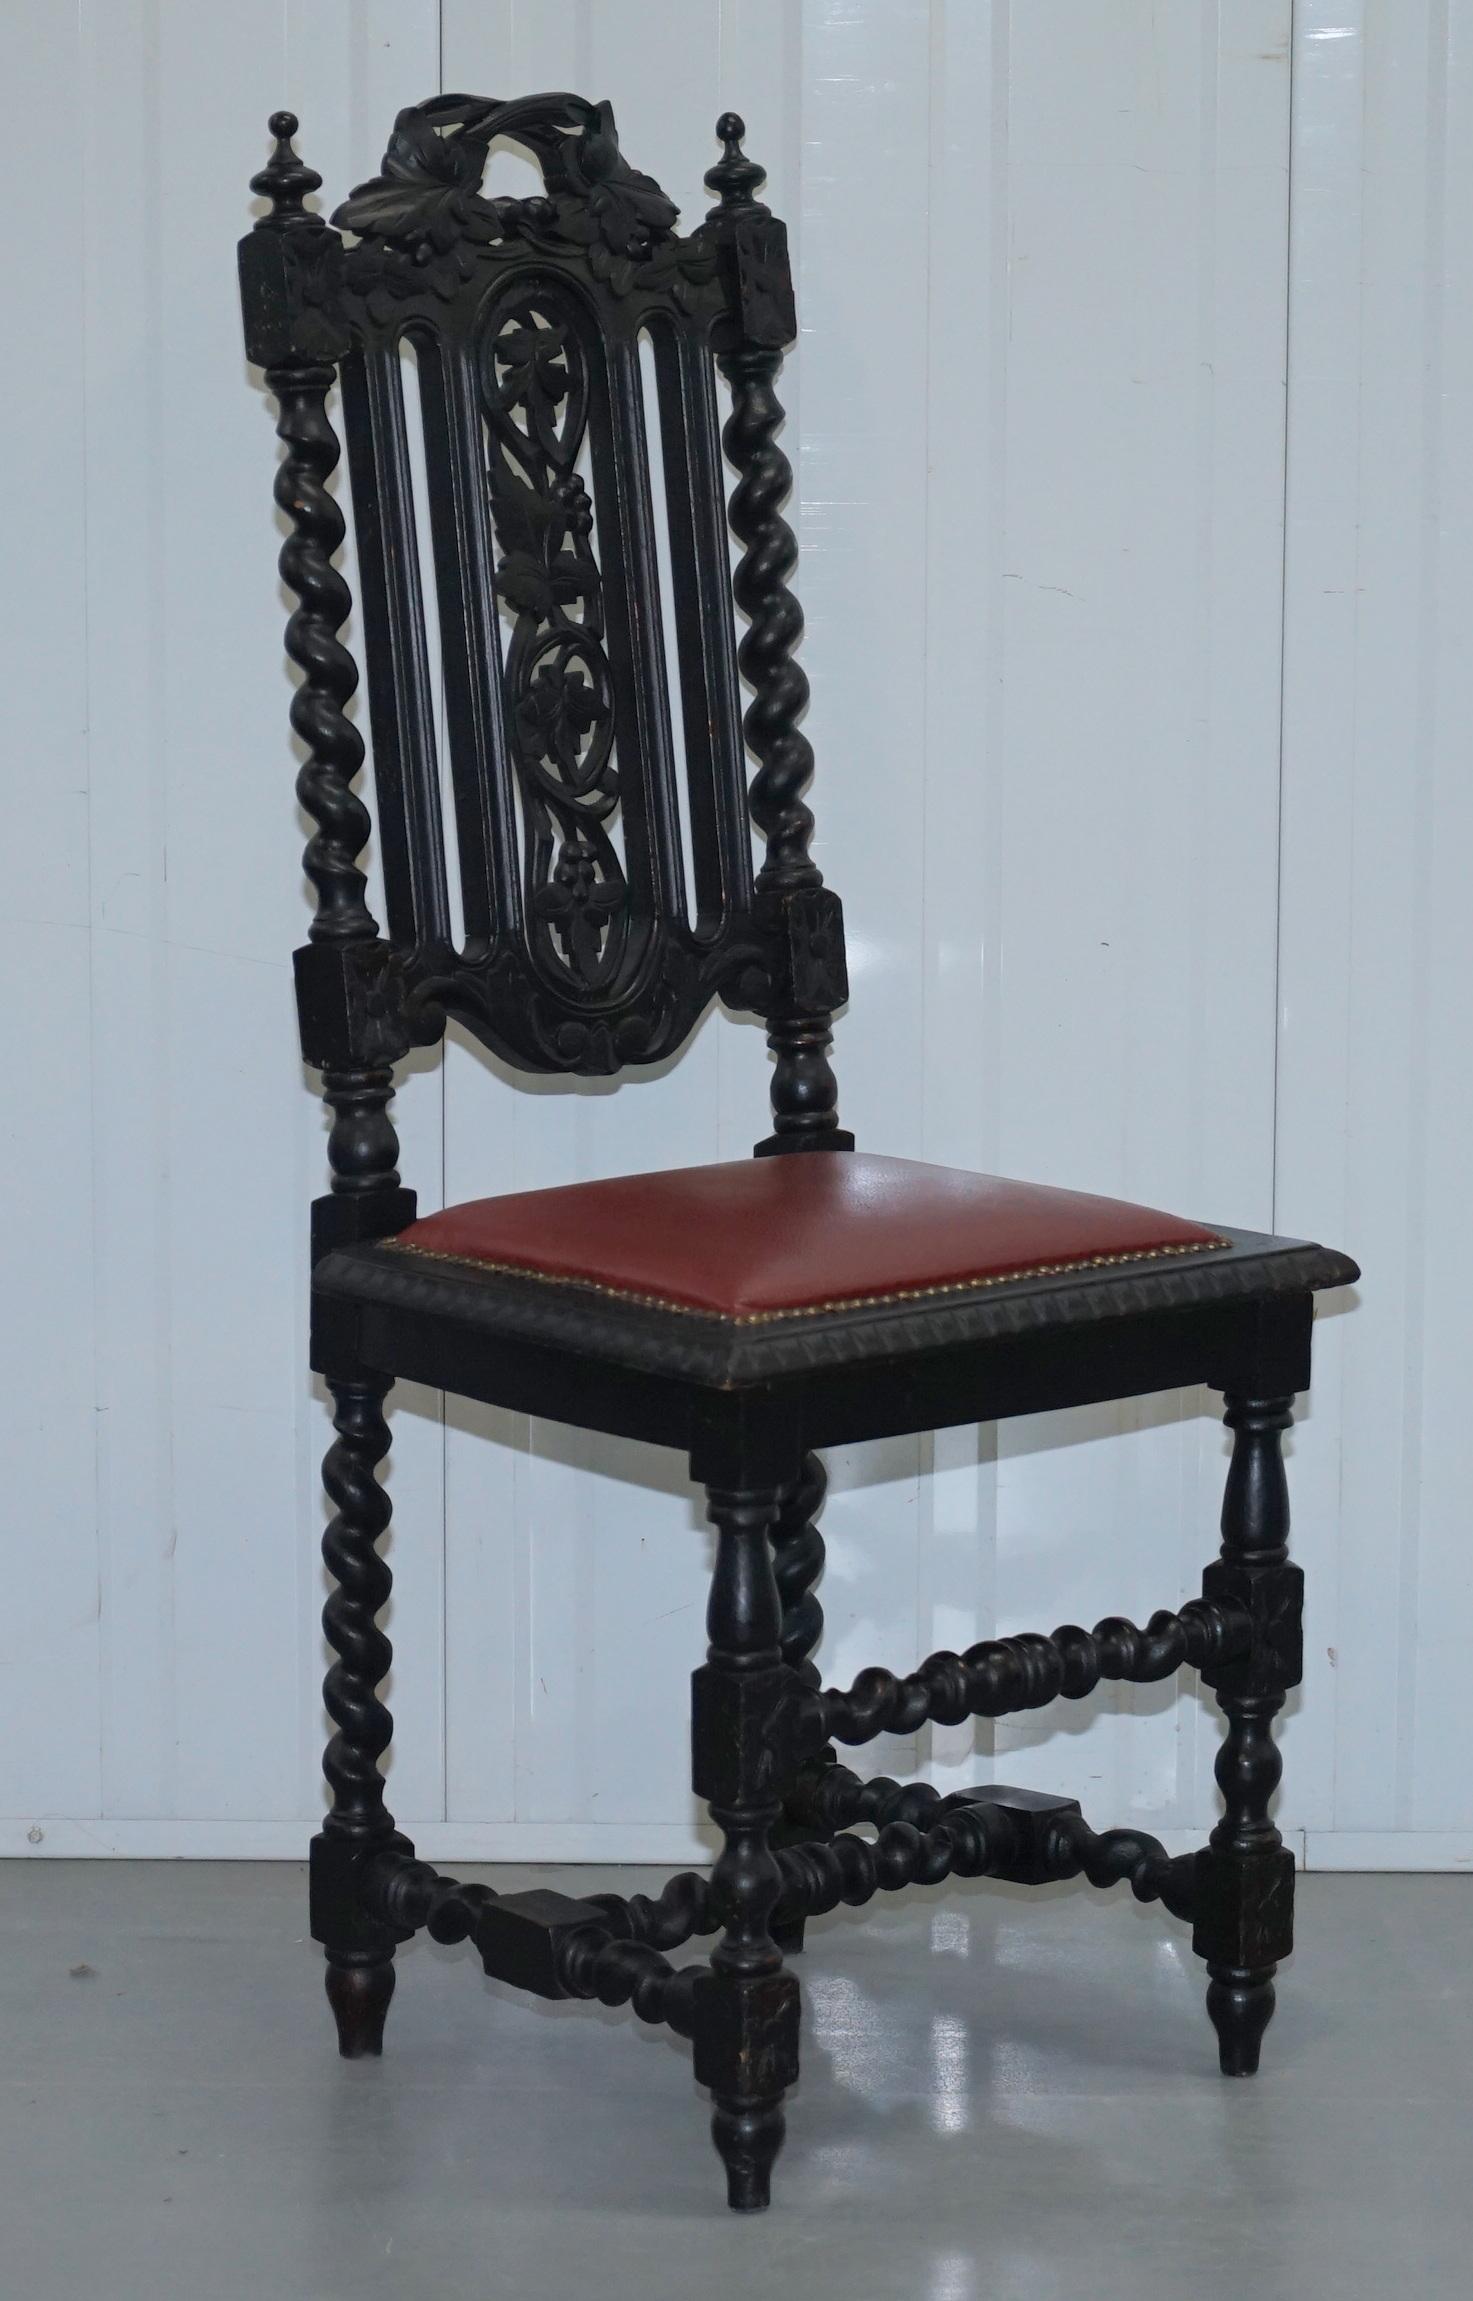 We are delighted to offer for sale this set of four Gothic-style Victorian hand carved English oak dining chairs with leather upholstery and ebonized black frames

The chairs have barley twist legs, ornate Jacobean / Gothic style carvings all